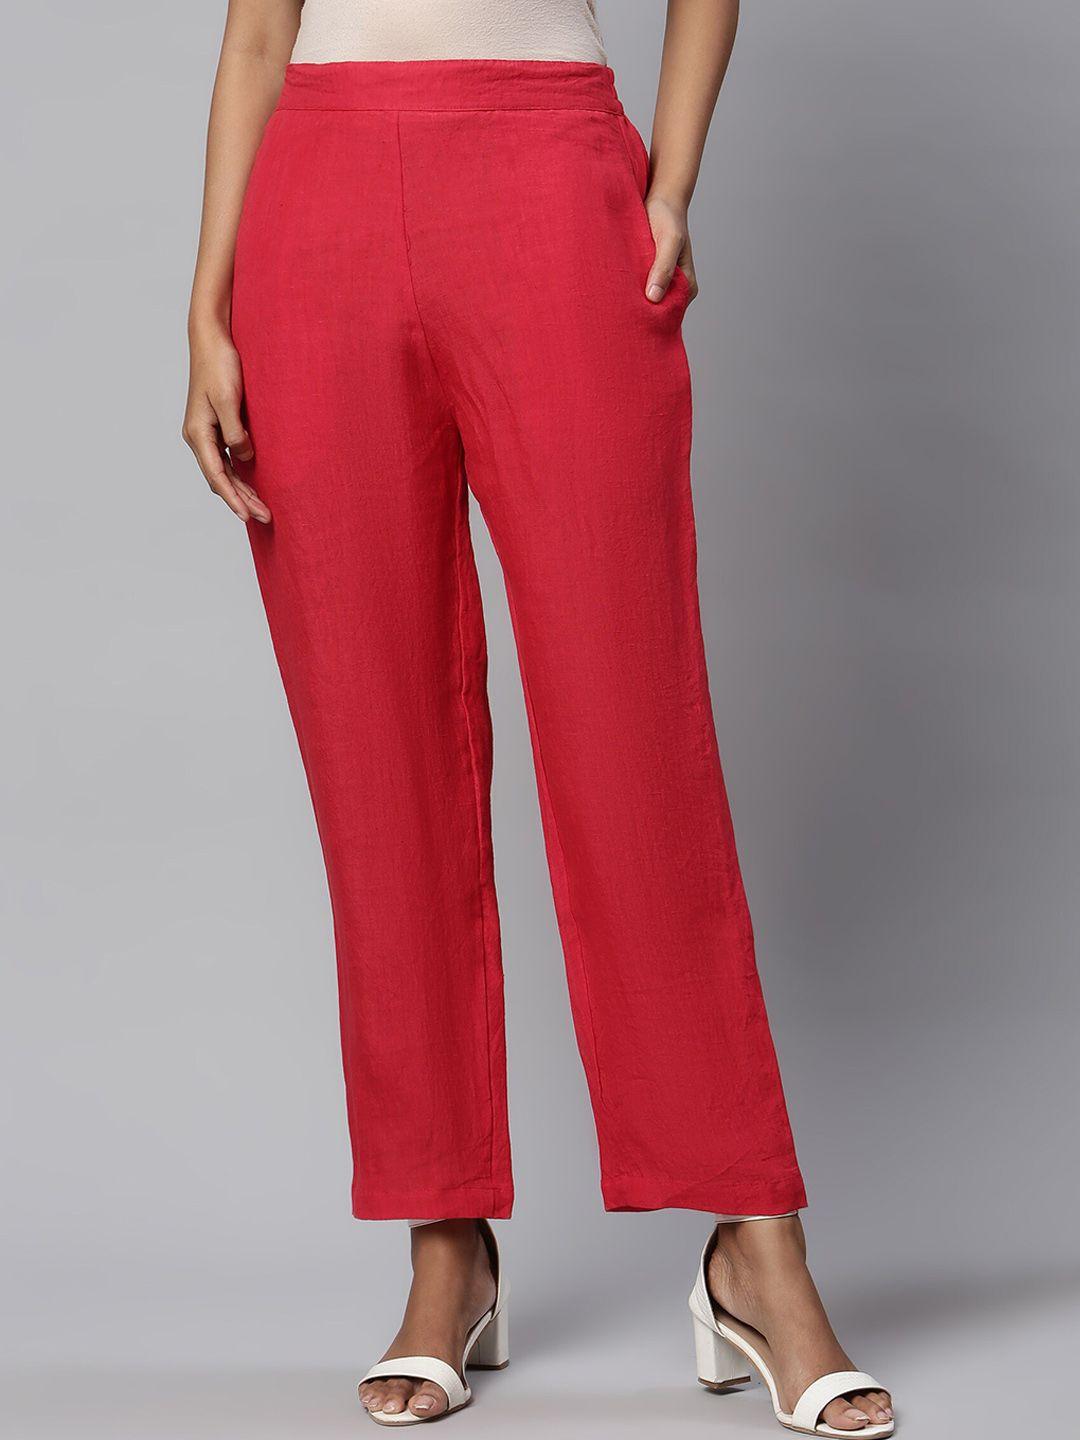 linen-club-woman-women-red-solid-lounge-pants